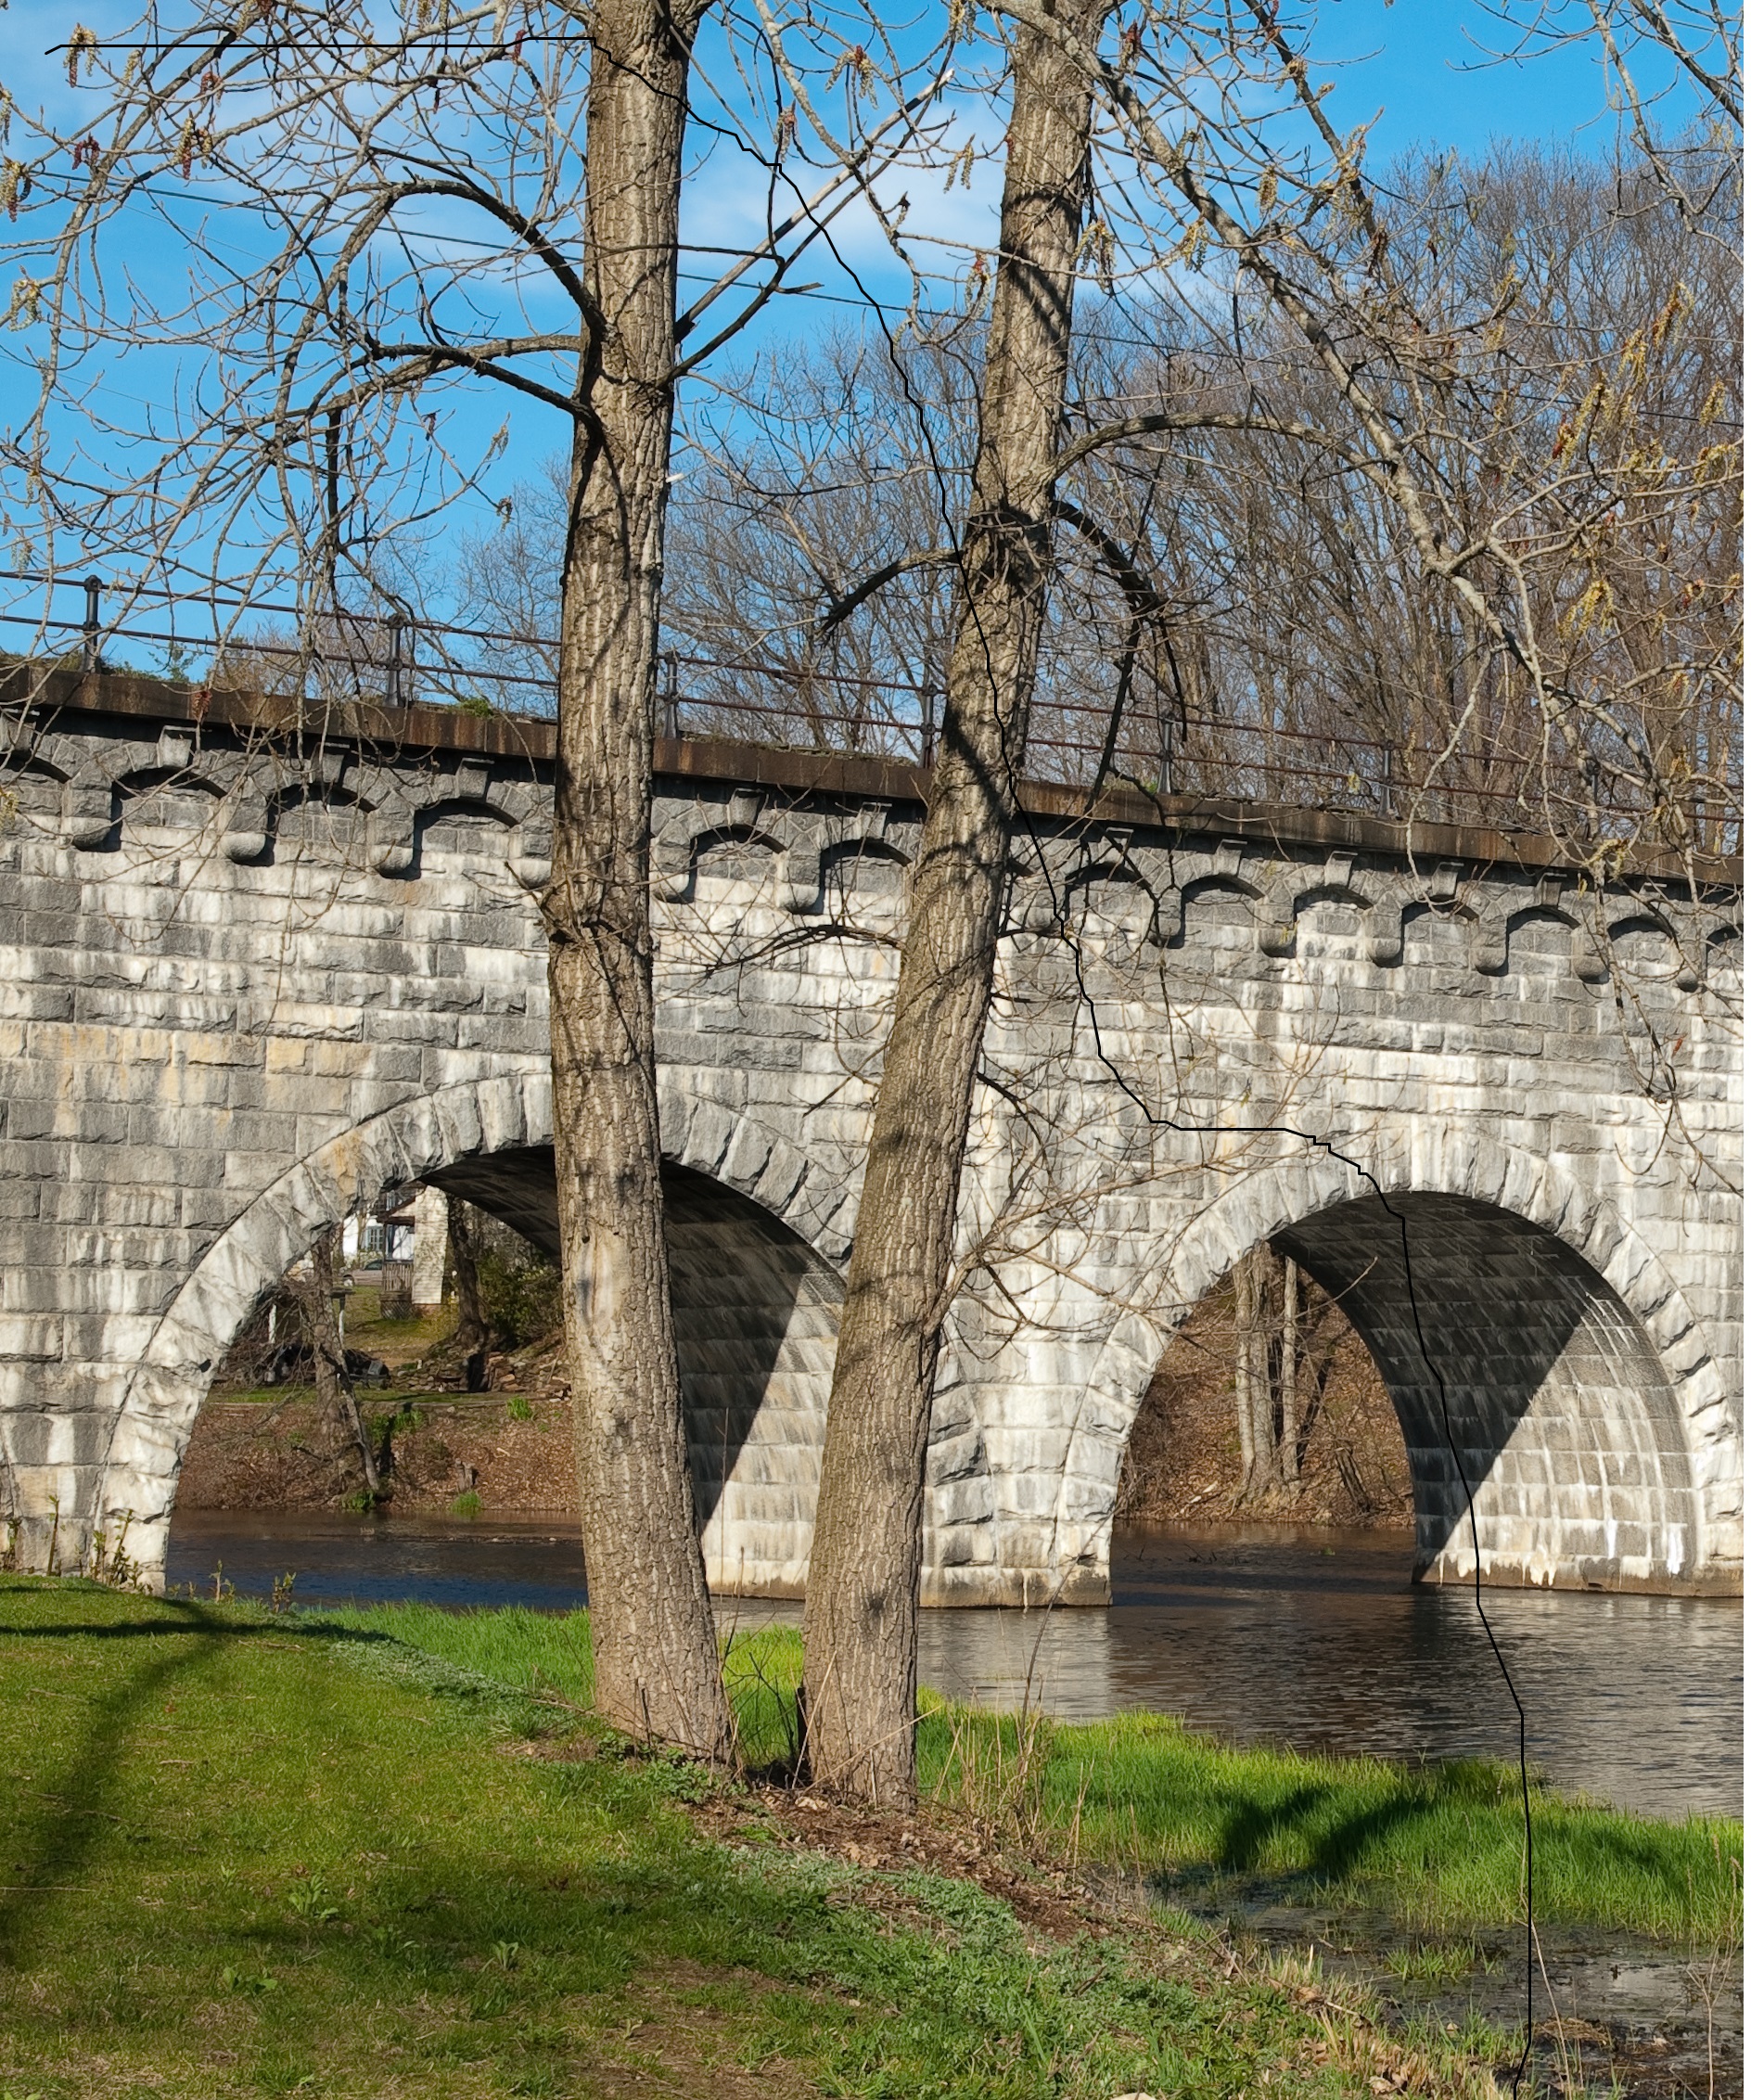 Stone arch bridge for train transportation. Image was taken during a beautiful day in New England. Useful image for any New England, train, bridge, aqueduct theme.